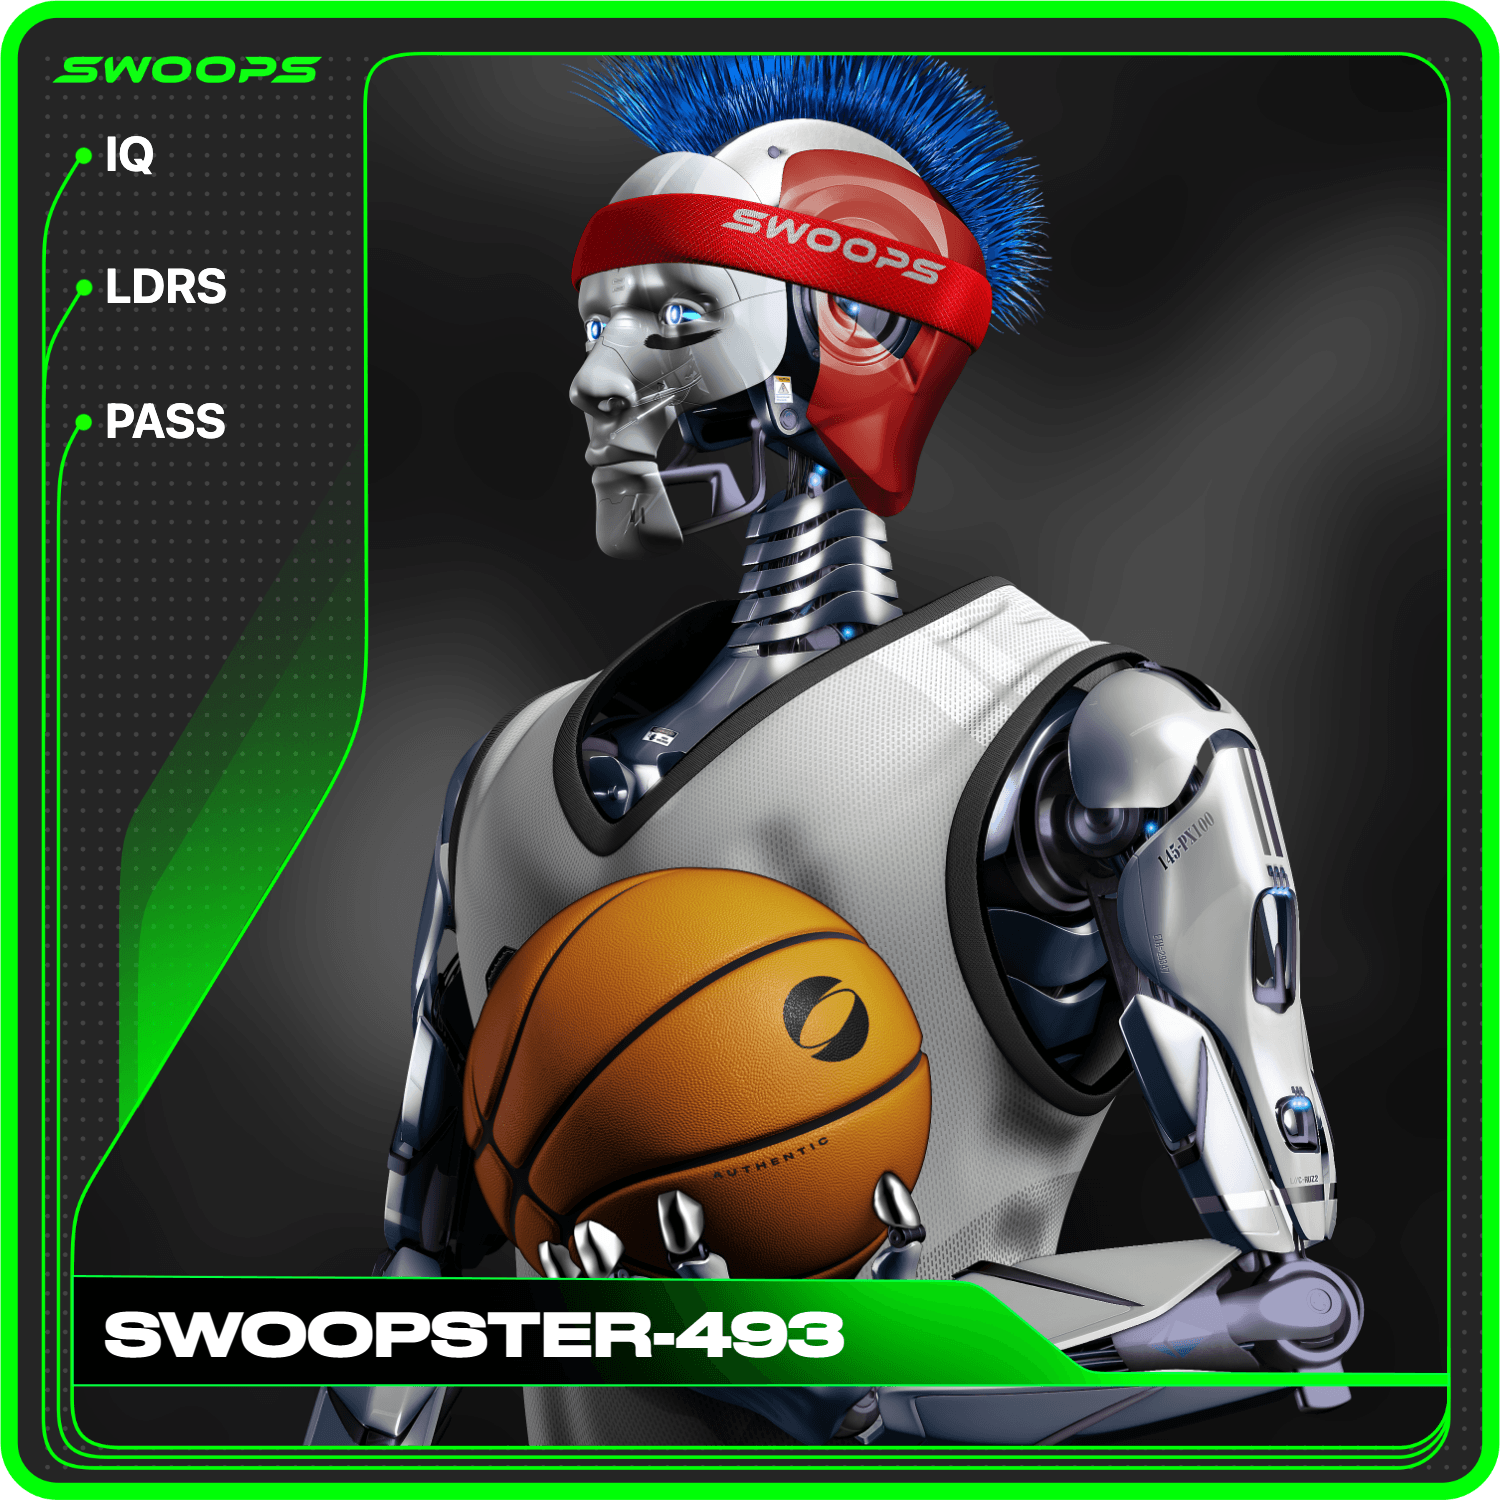 SWOOPSTER-493